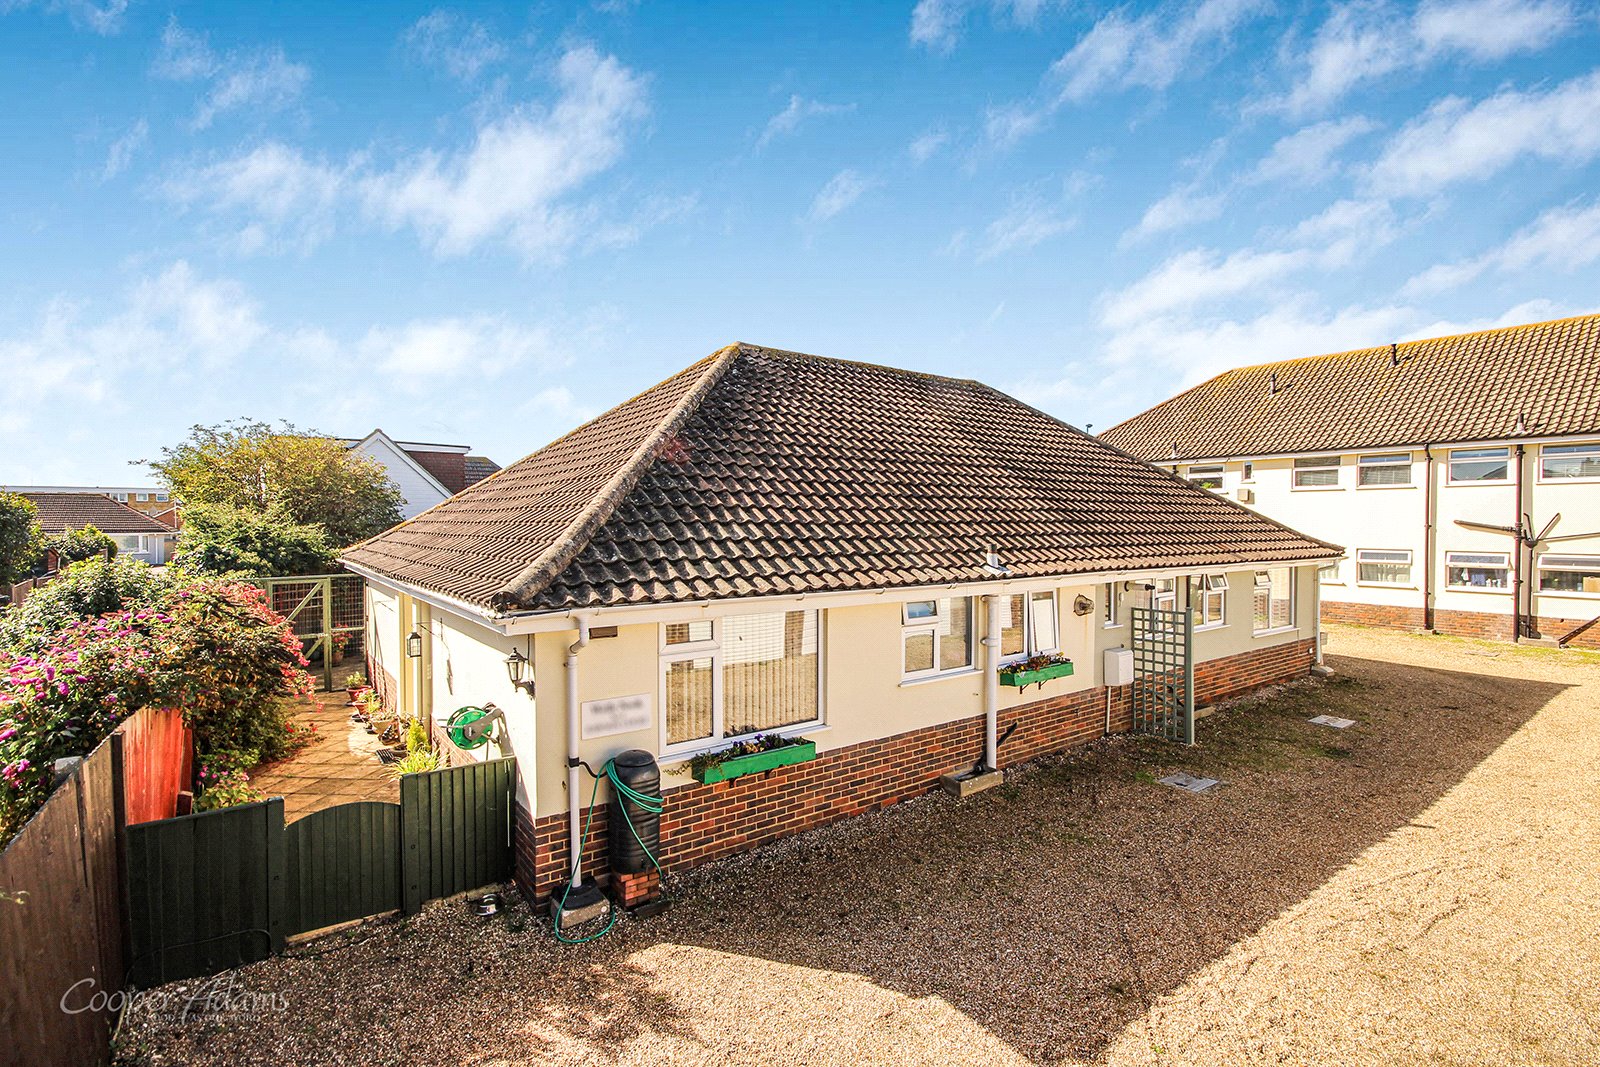 2 bed bungalow for sale in Sea Lane, Rustington - Property Image 1